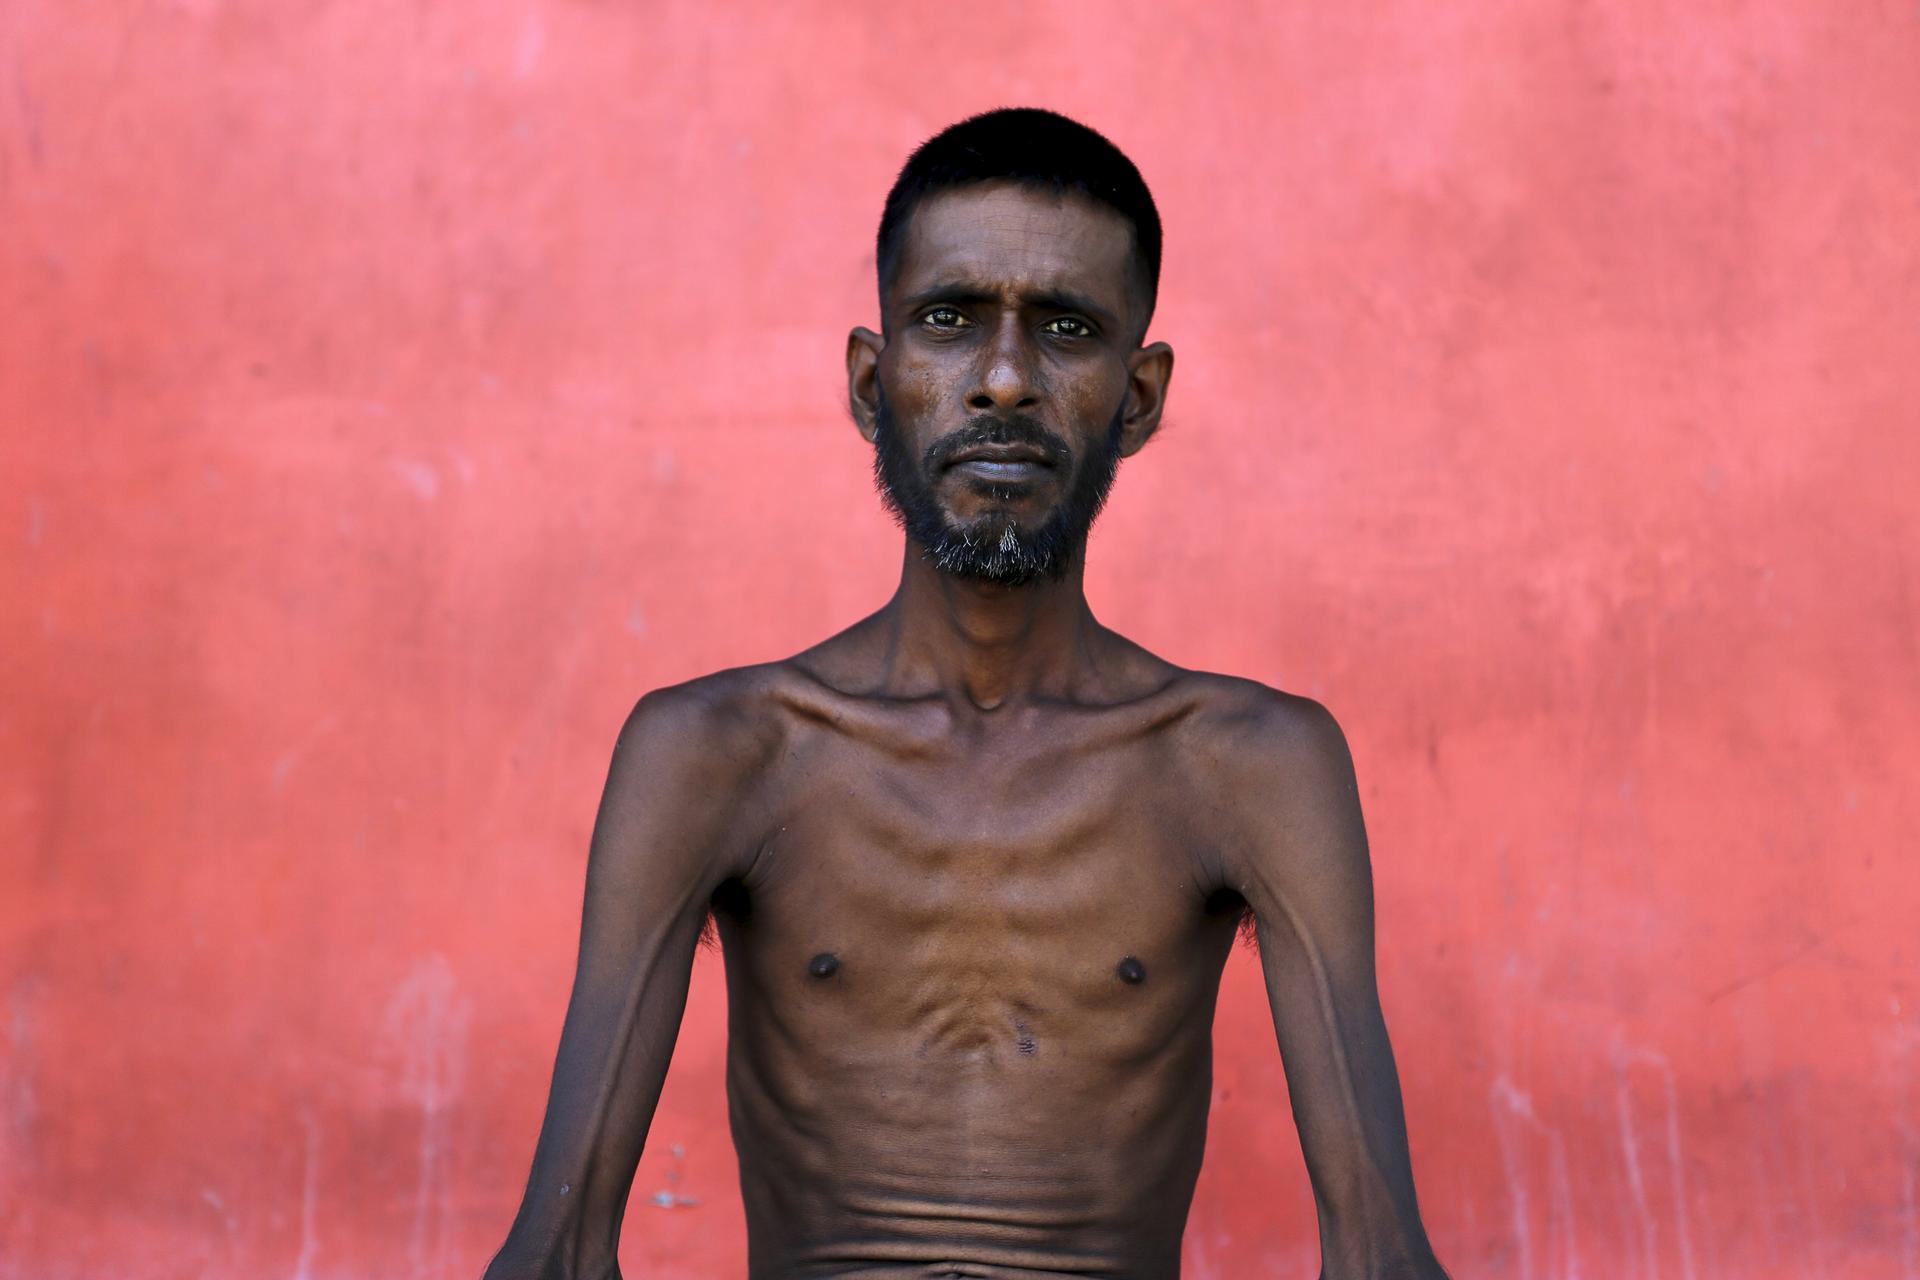 One of the ‘boat people.’ A Bangladeshi migrant allowed into Indonesia after weeks at sea.